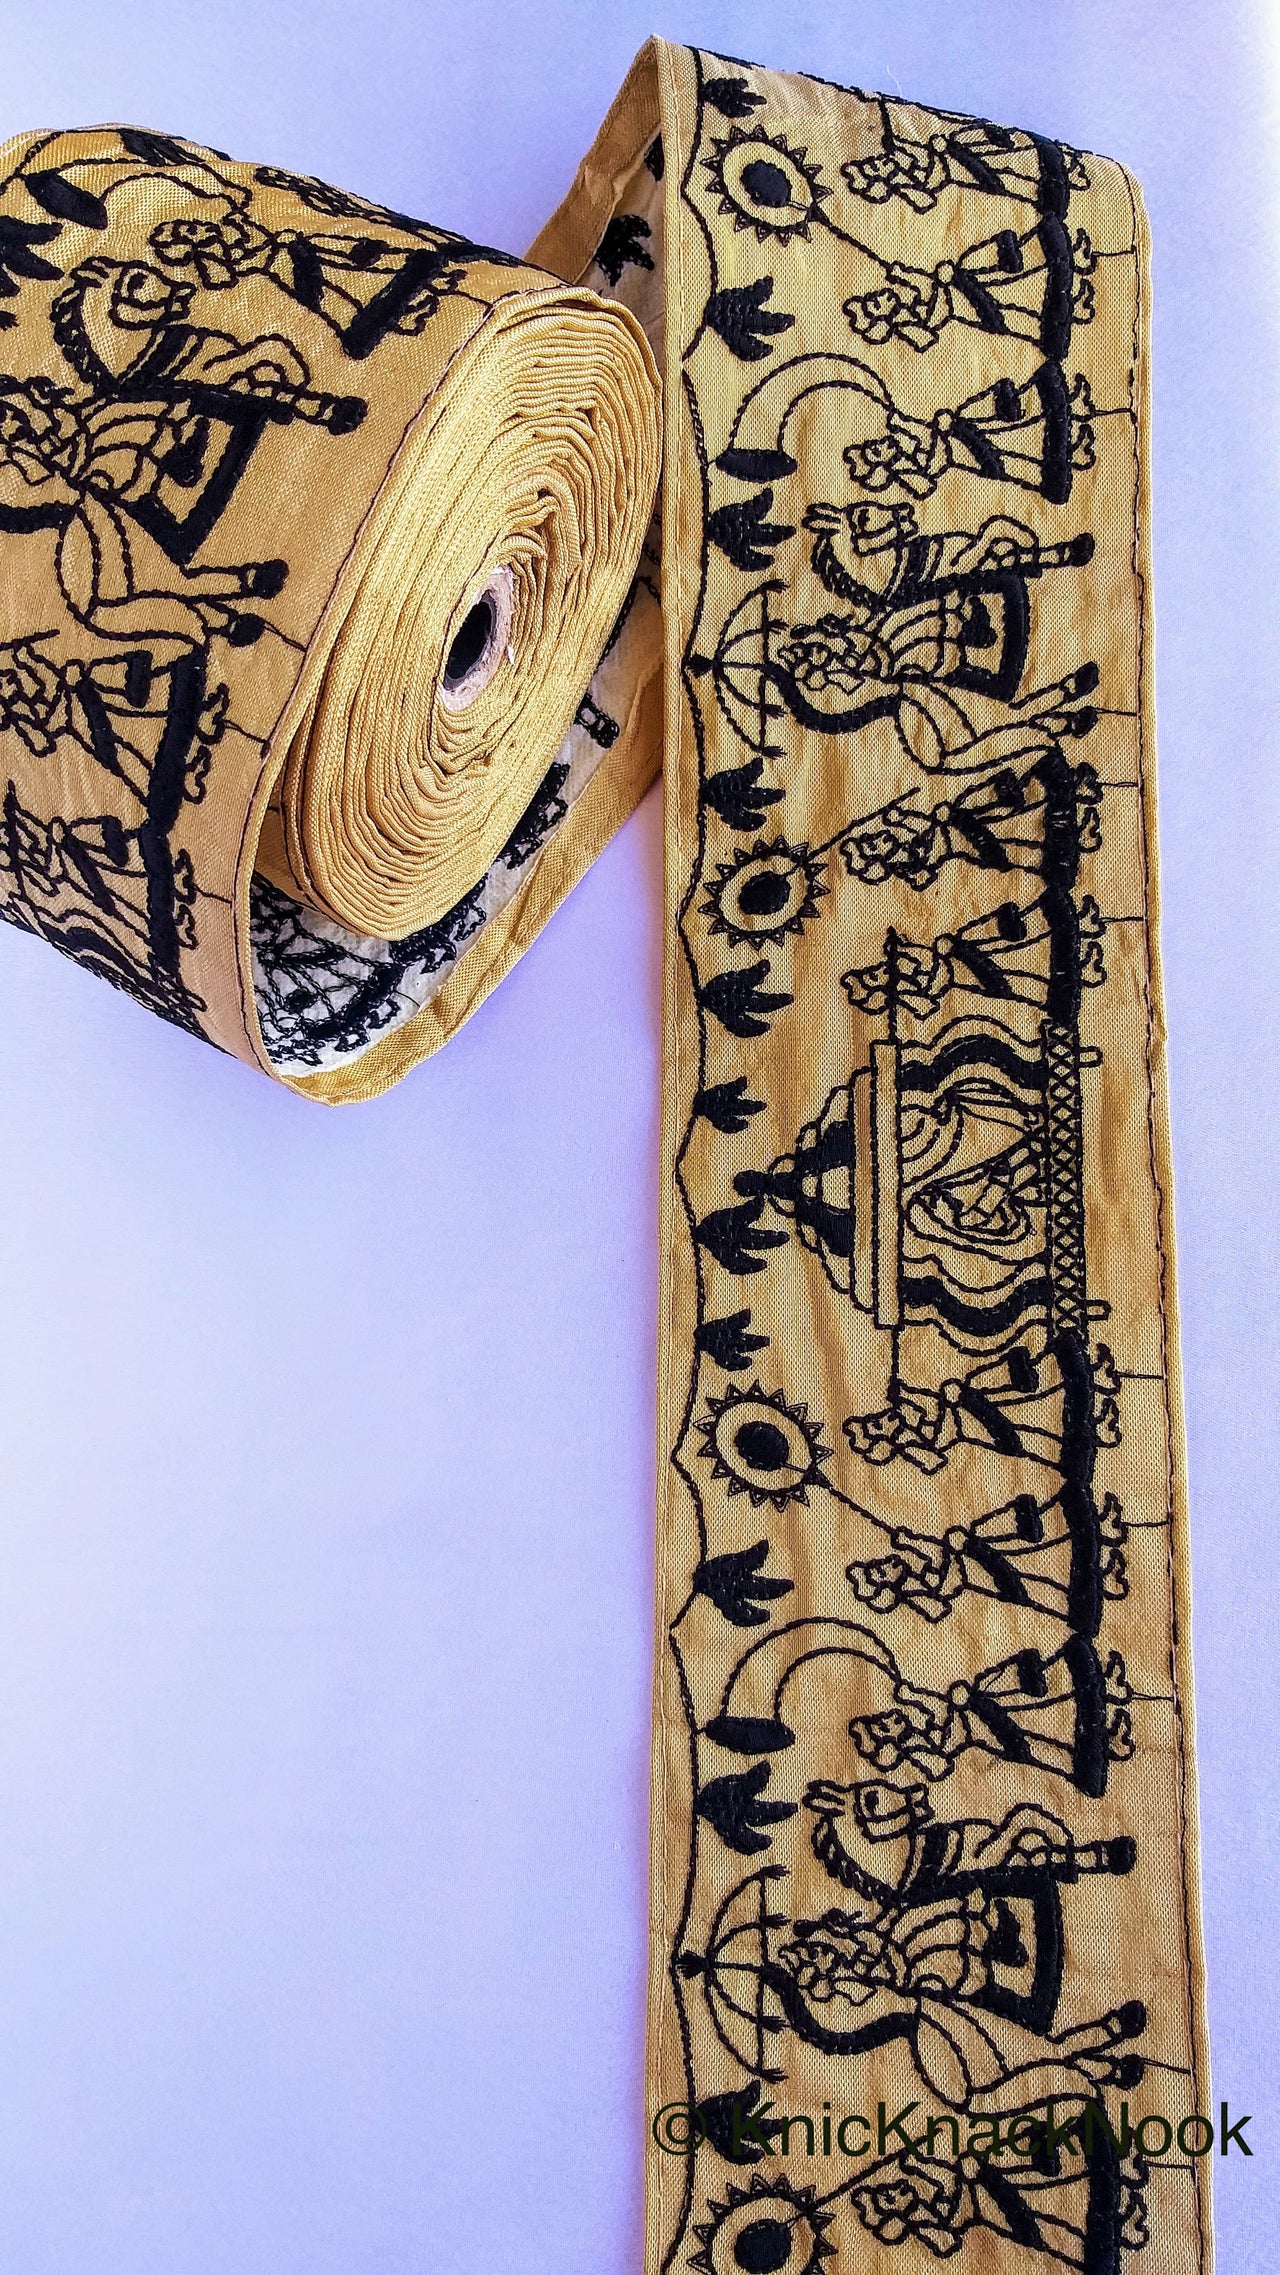 Beige / White Silk Trim With Intricate Black Embroidery Of Indian Bride and Groom, Baraat, Wedding Trim, Man With Horse And Woman in SedanTrim